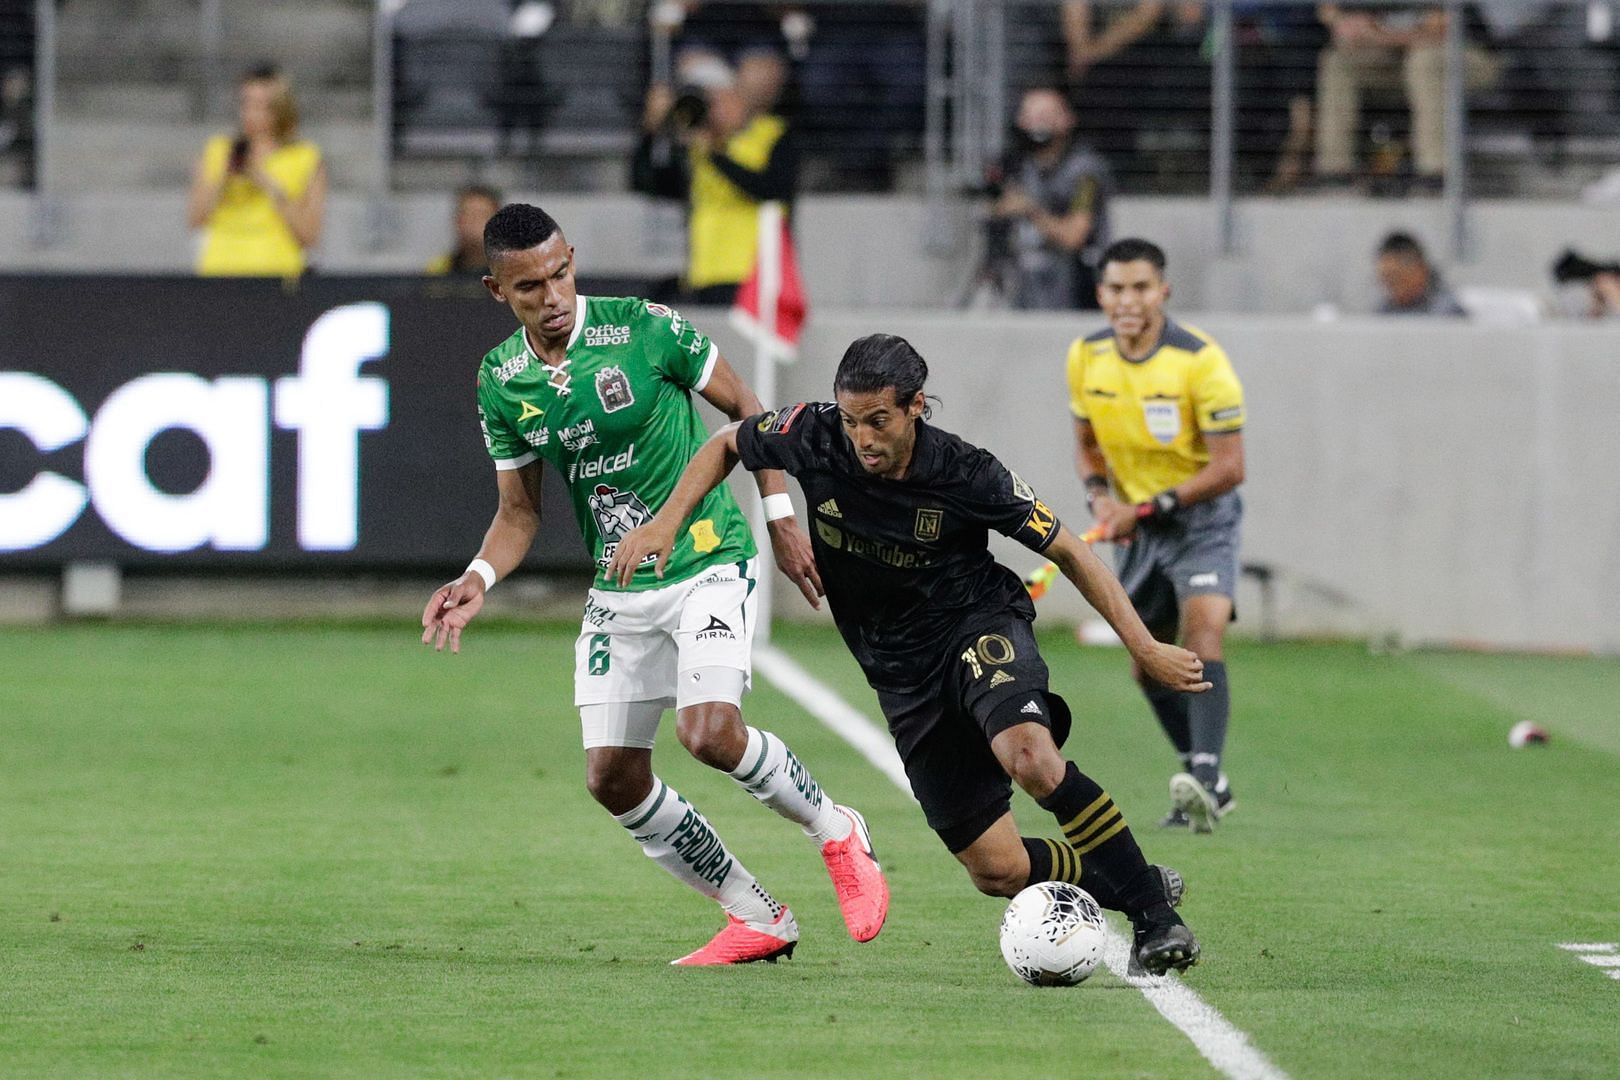 Leon and Los Angeles meet in the CONCACAF Champions League final on Wednesday